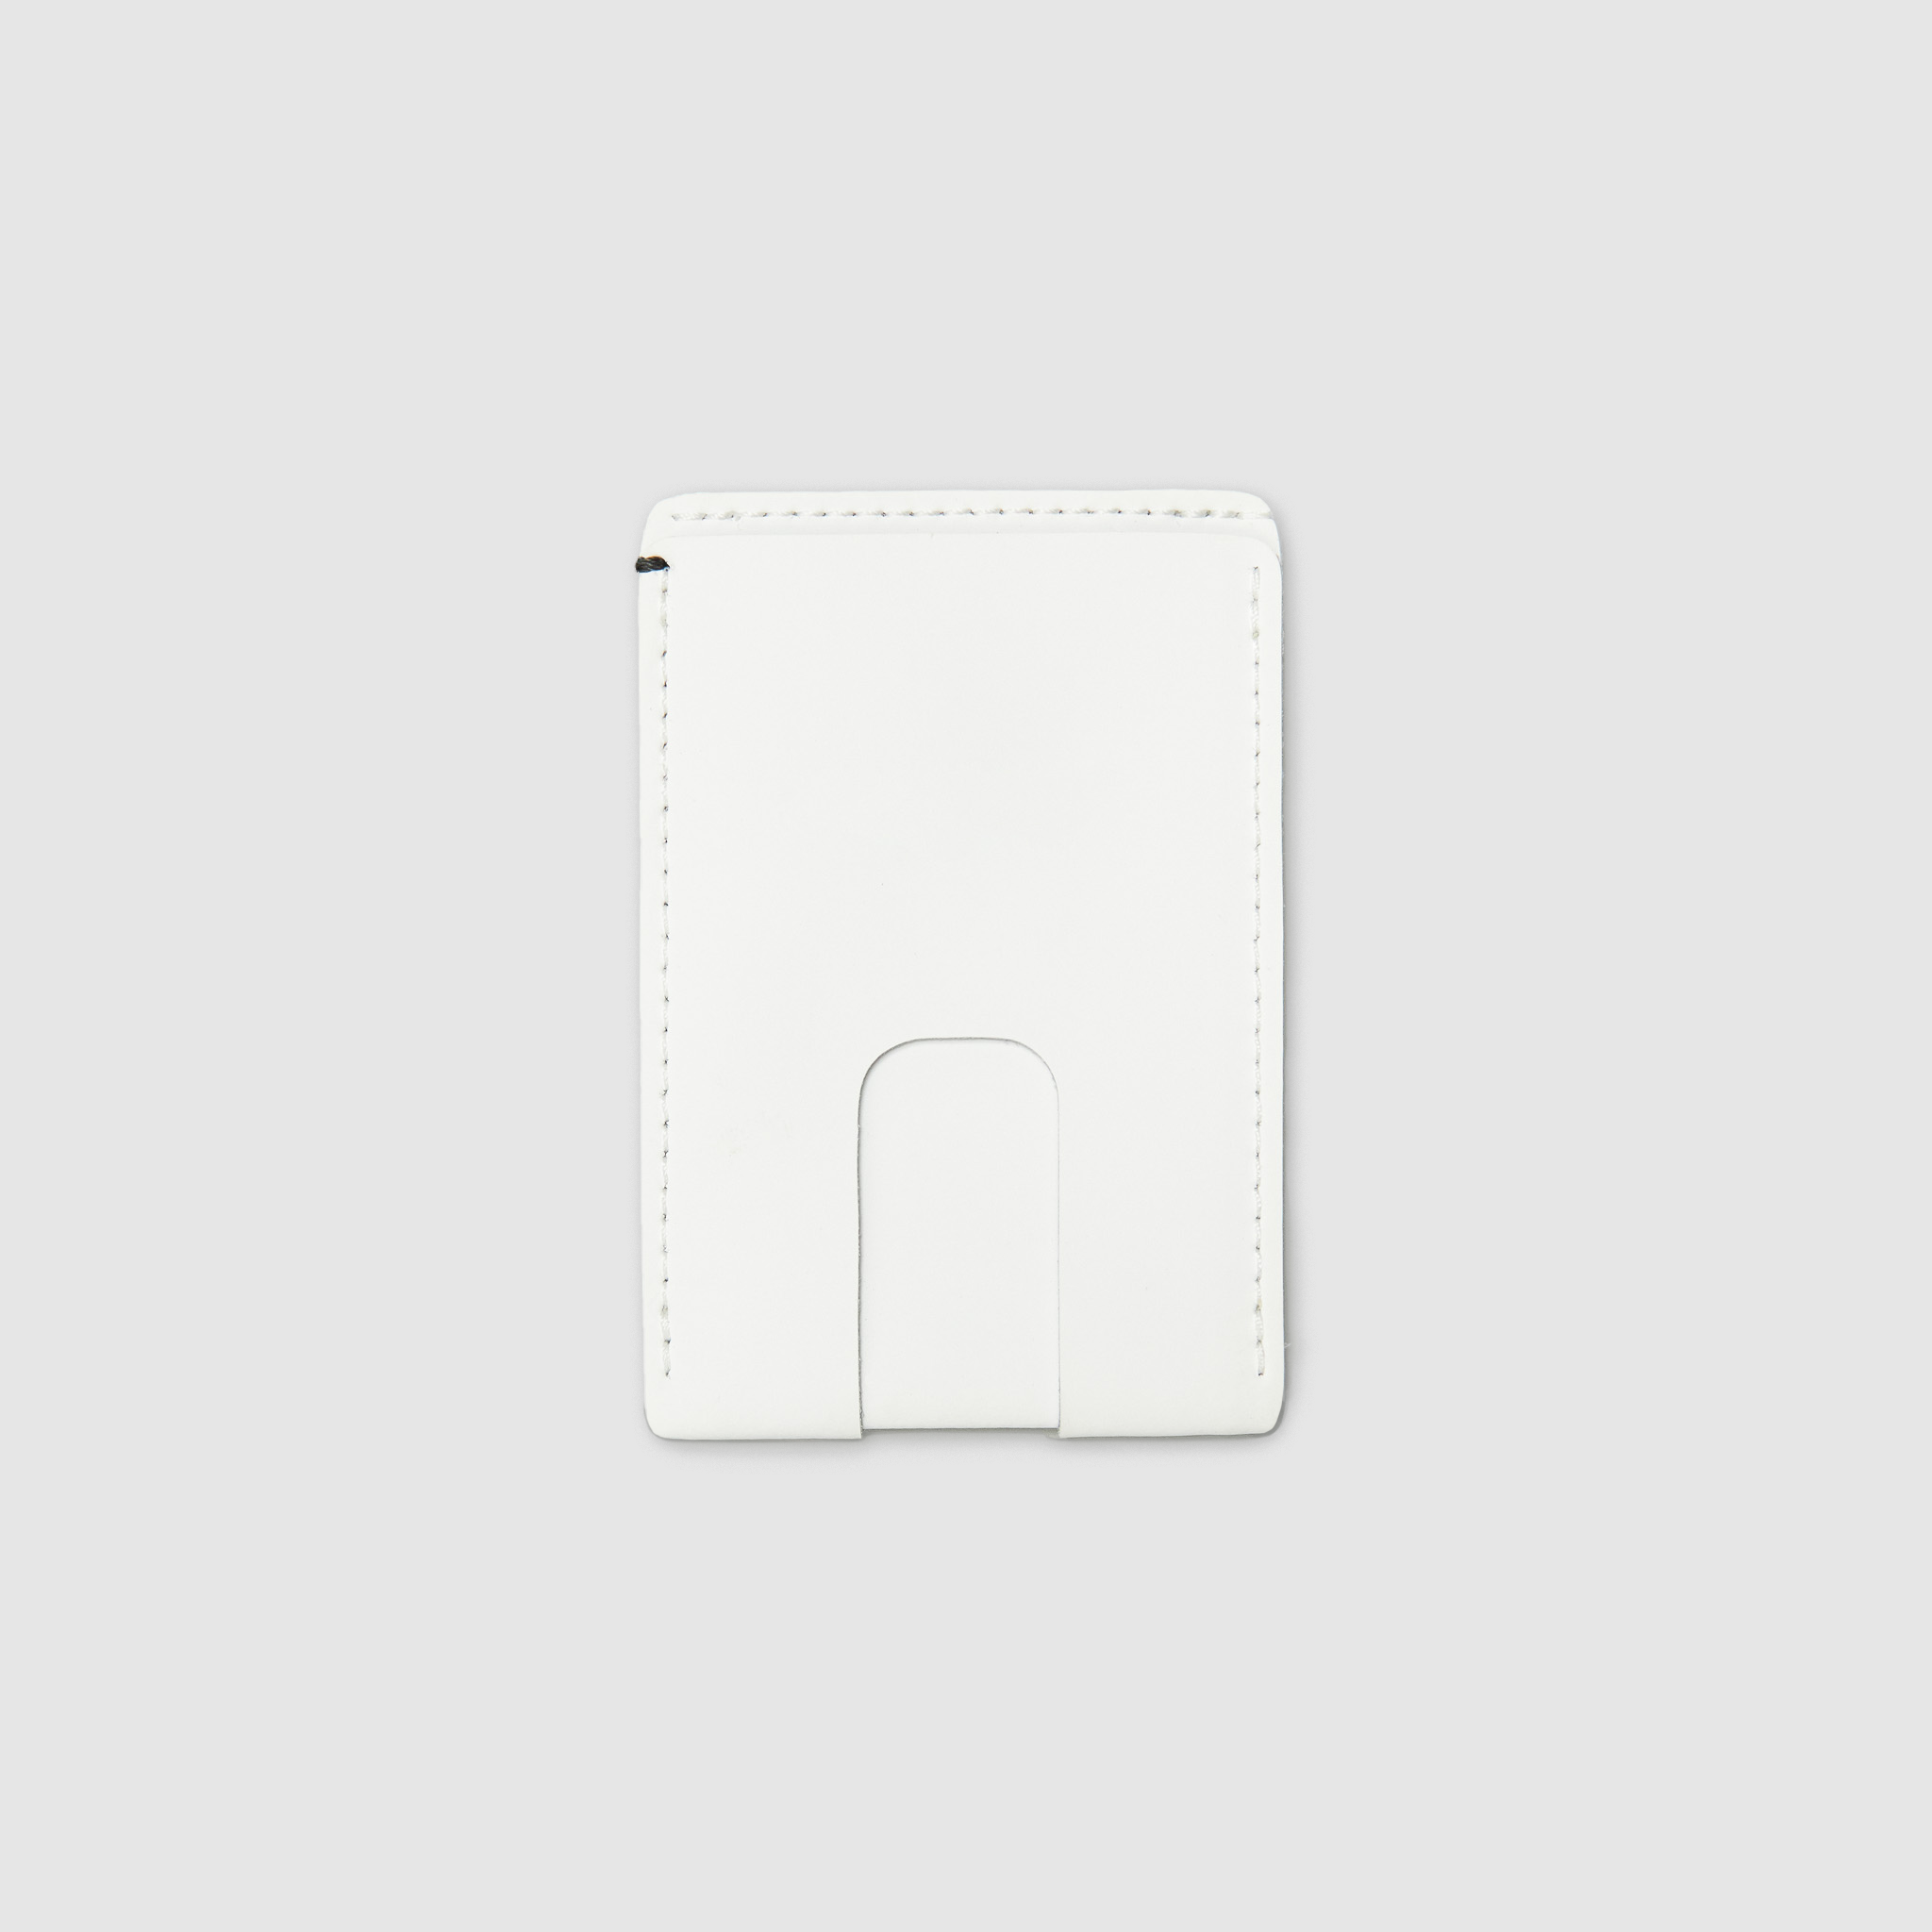 Wallet of 6 White Window Markers – Evercarts